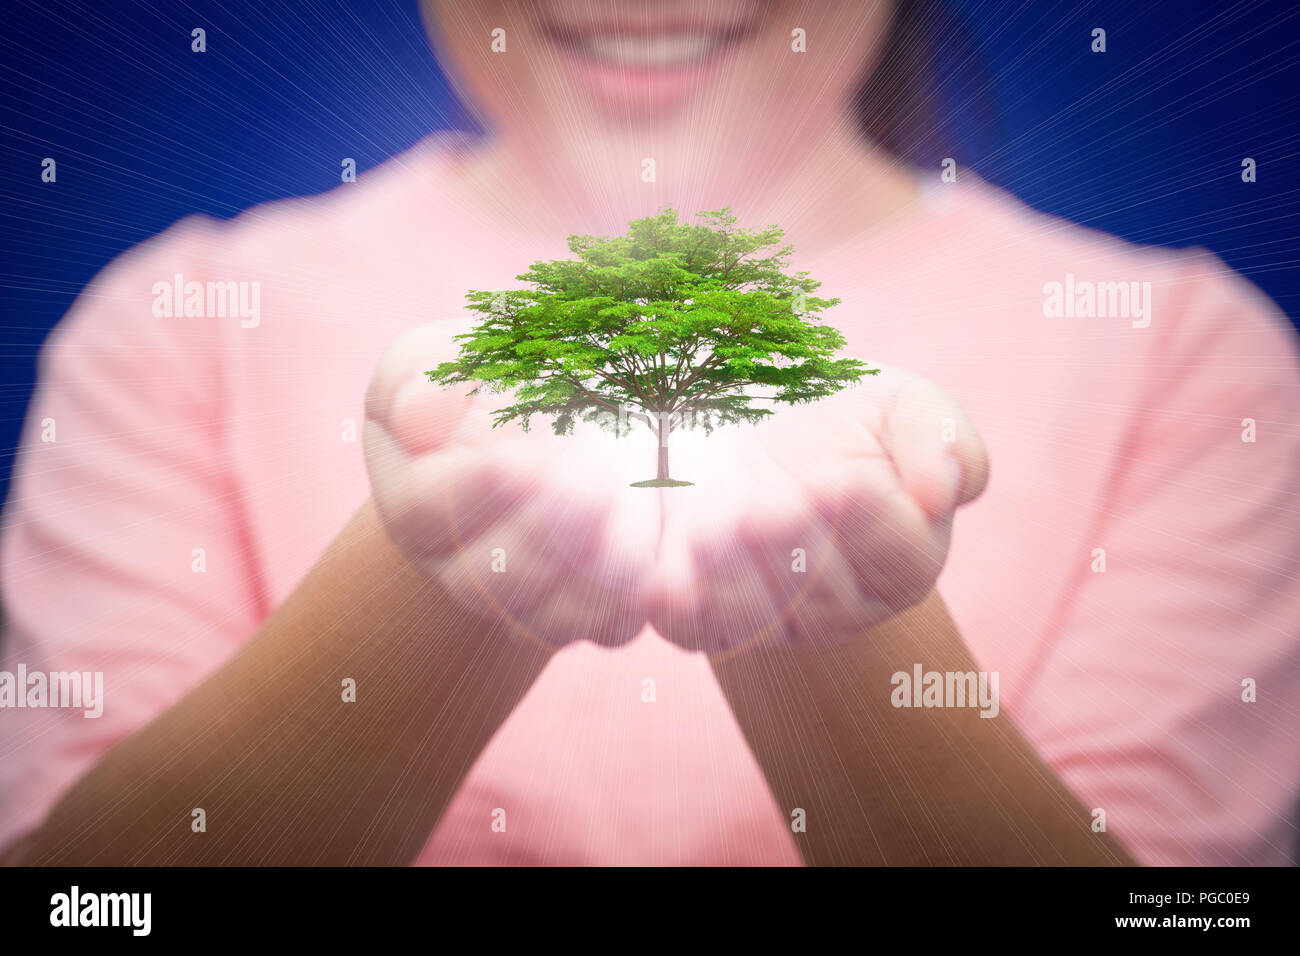 tree in woman hand help to protect nature and ecology reservation for future human life Stock Photo